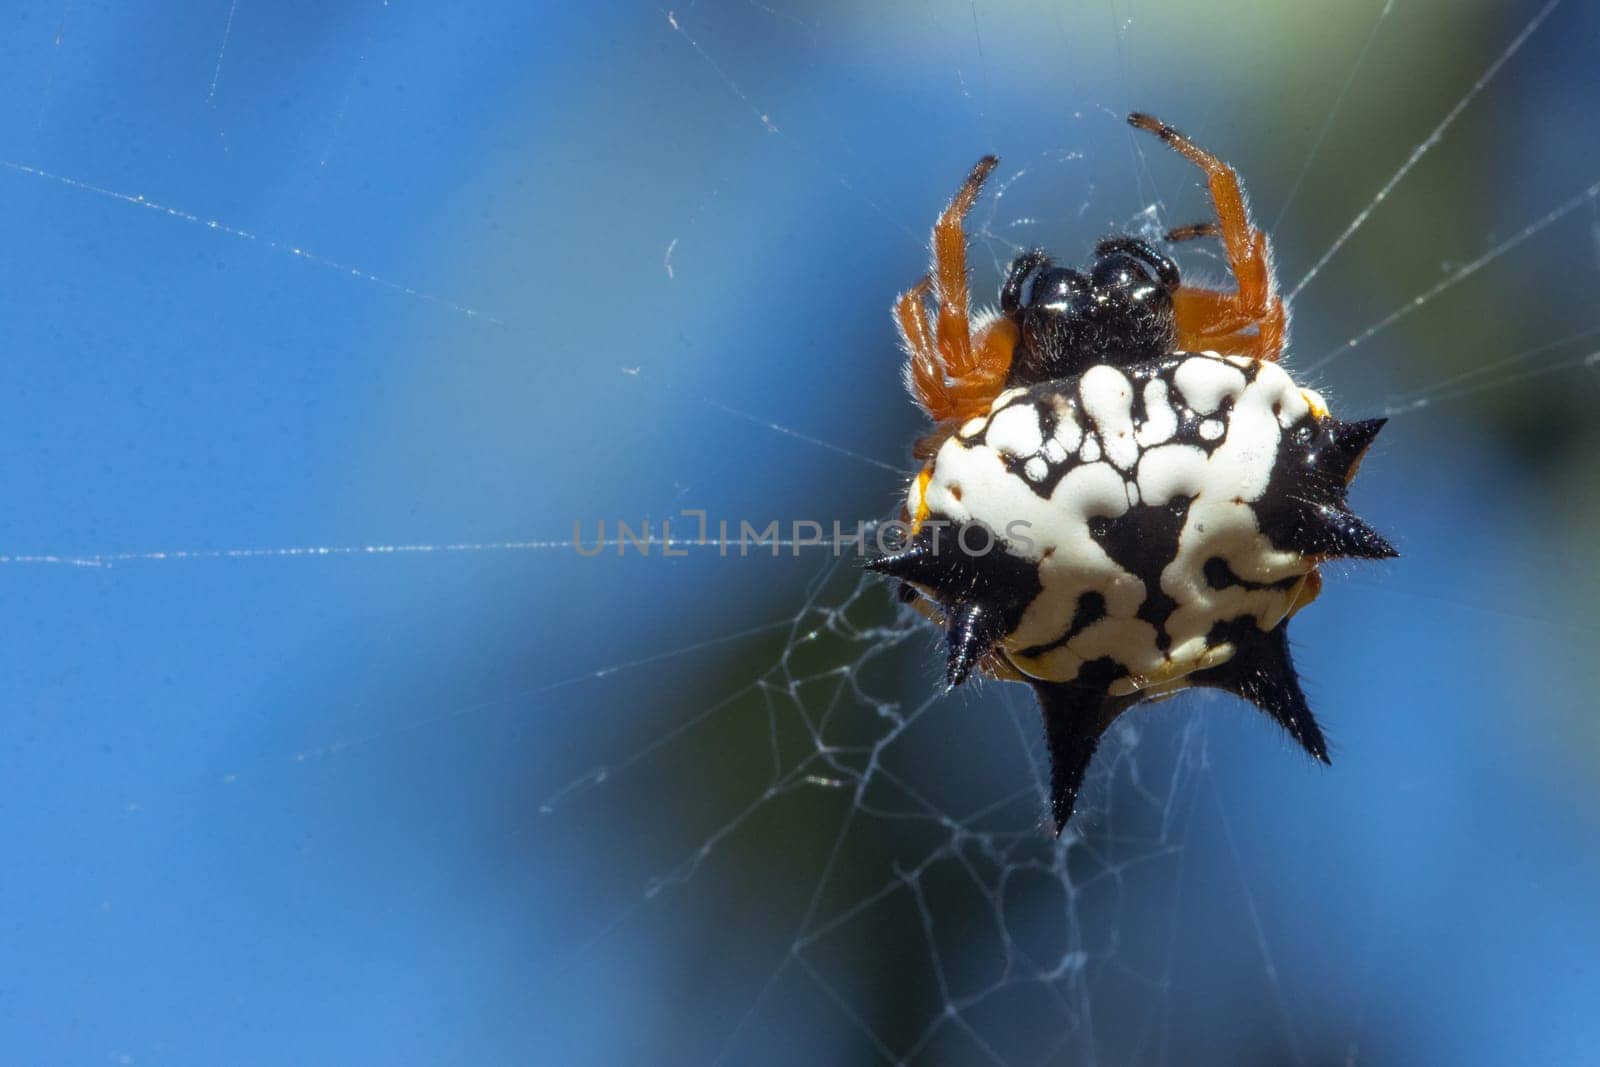 Colorful white, orange and black jewel spider suspended in its web by StefanMal